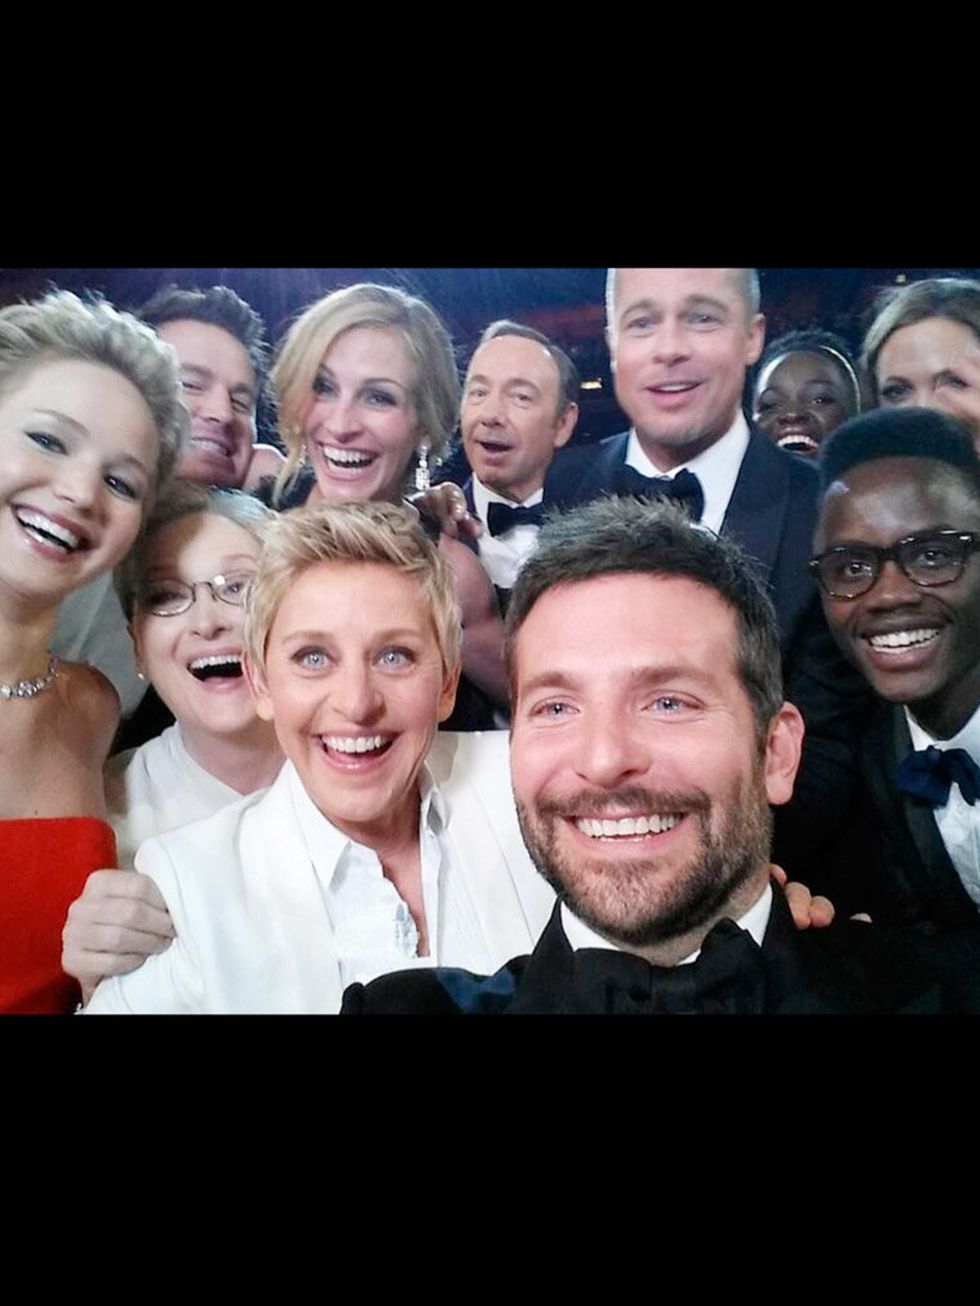 <p>Getting in on the <a href="http://www.elleuk.com/fashion/news/ellen-degeneres-oscars-selfie-most-retweeted-ever">ultimate selfie</a> (just about)</p>